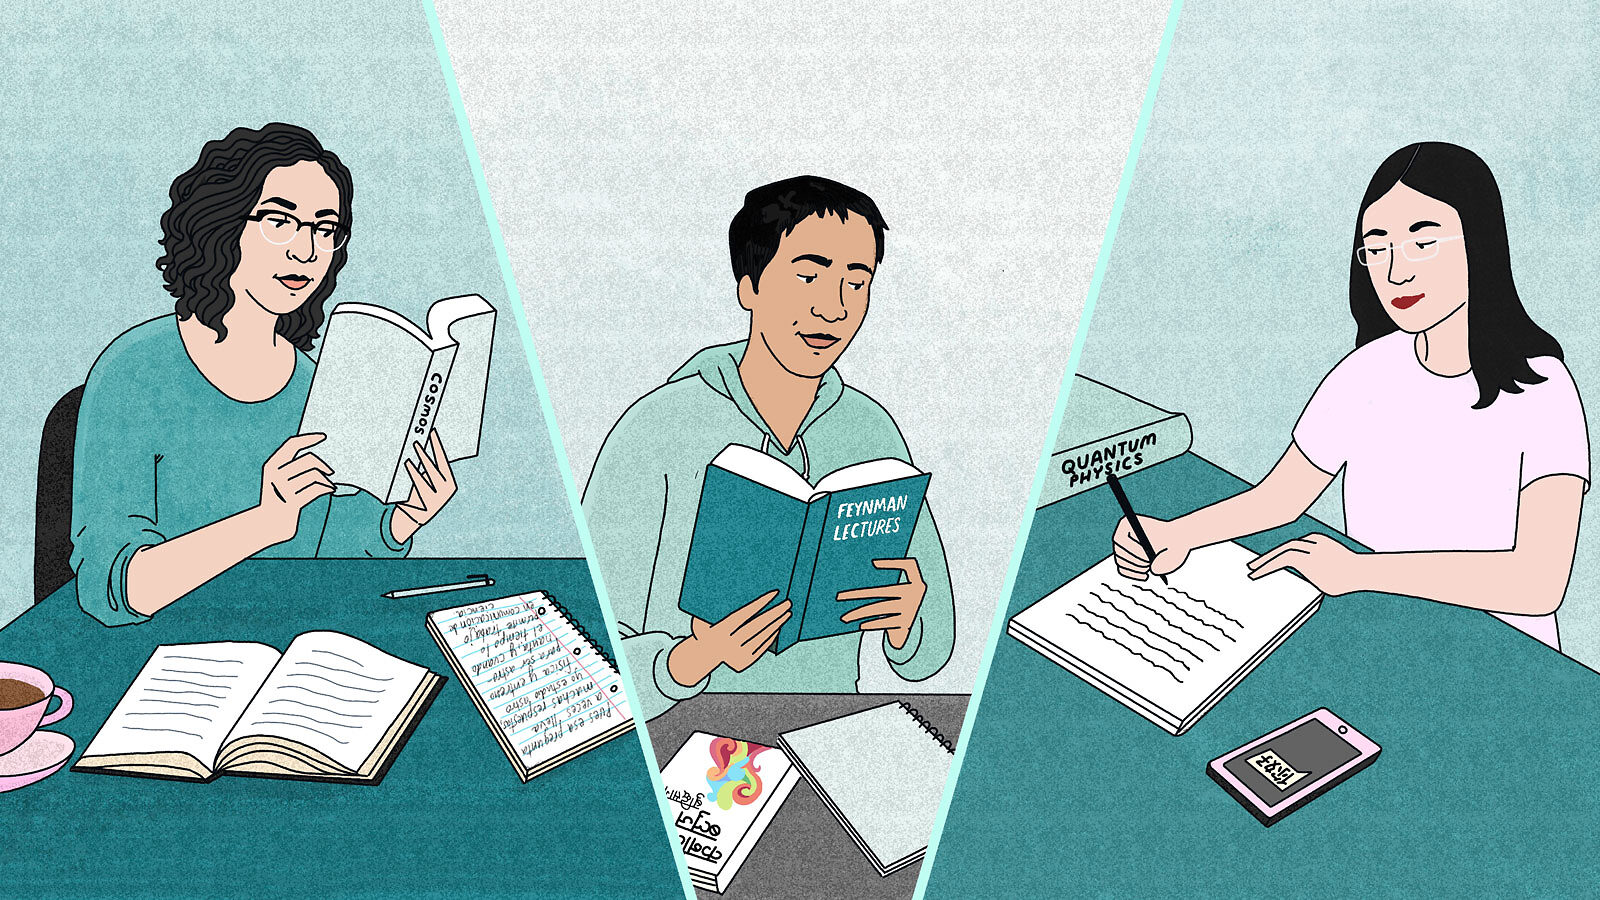 Illustration of scientists studying books written in English